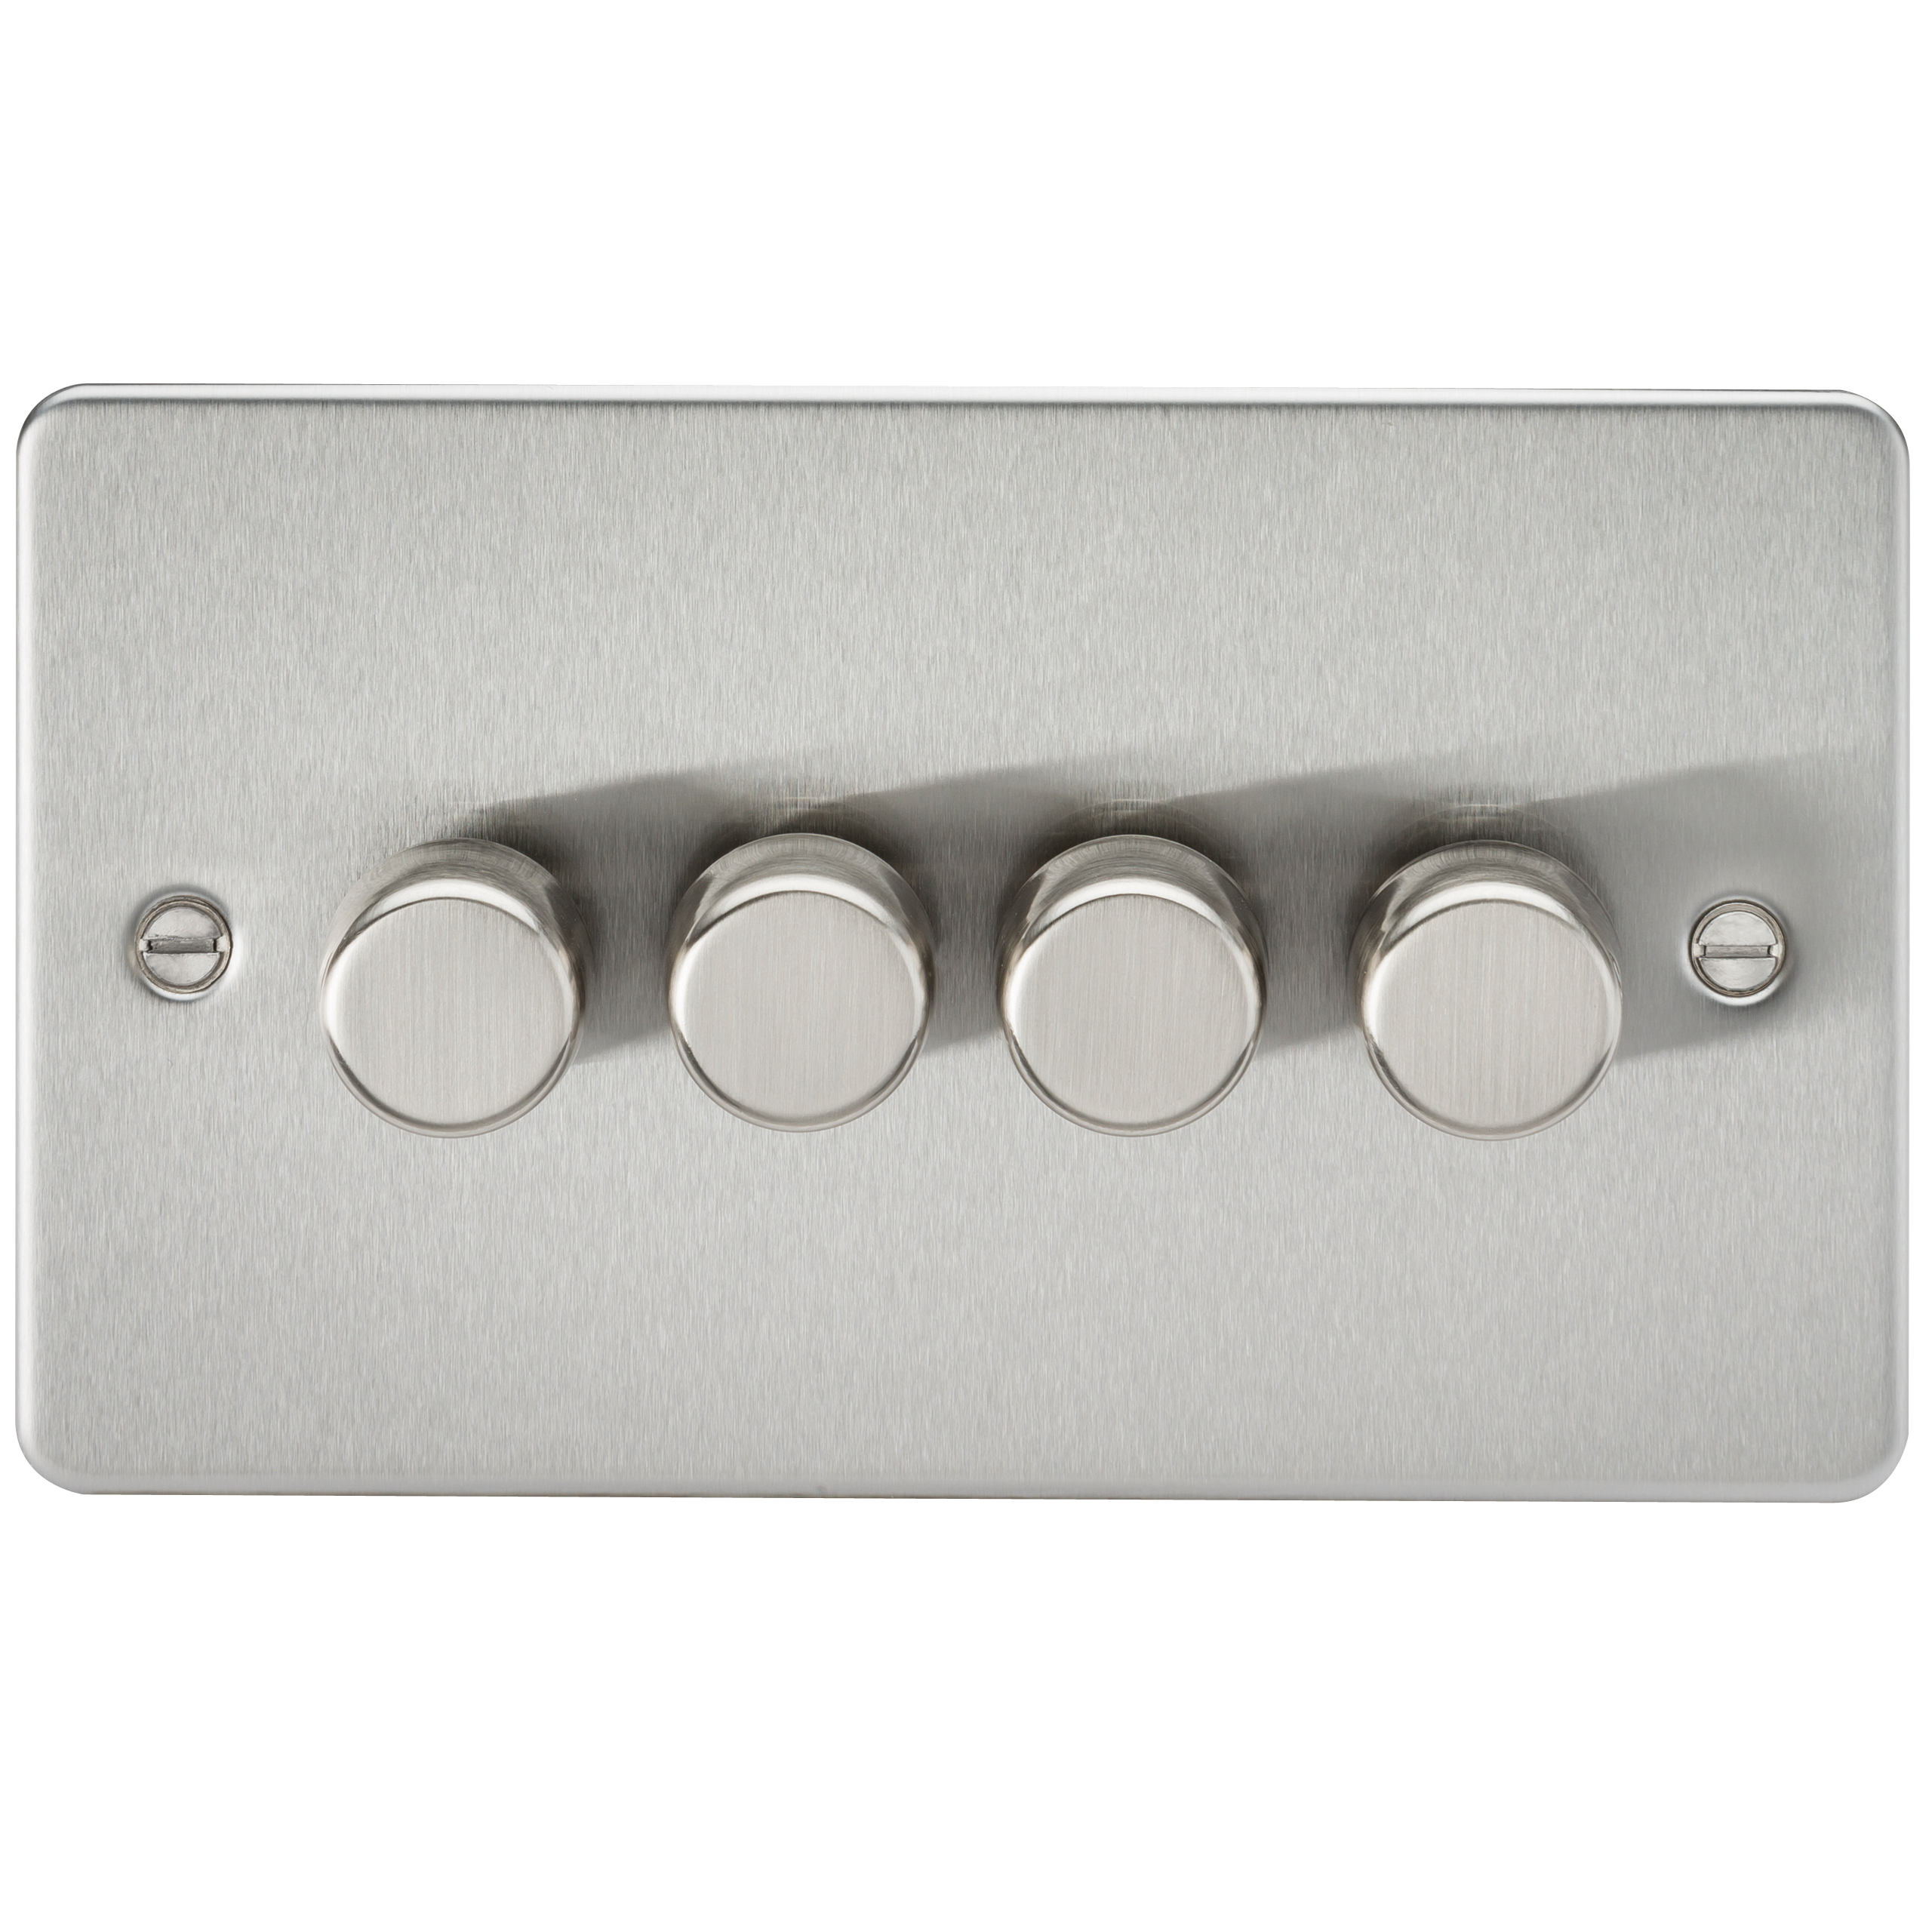 FLAT PLATE 4G 2 WAY 40-400W DIMMER - BRUSHED CHROME - FP2174BC 